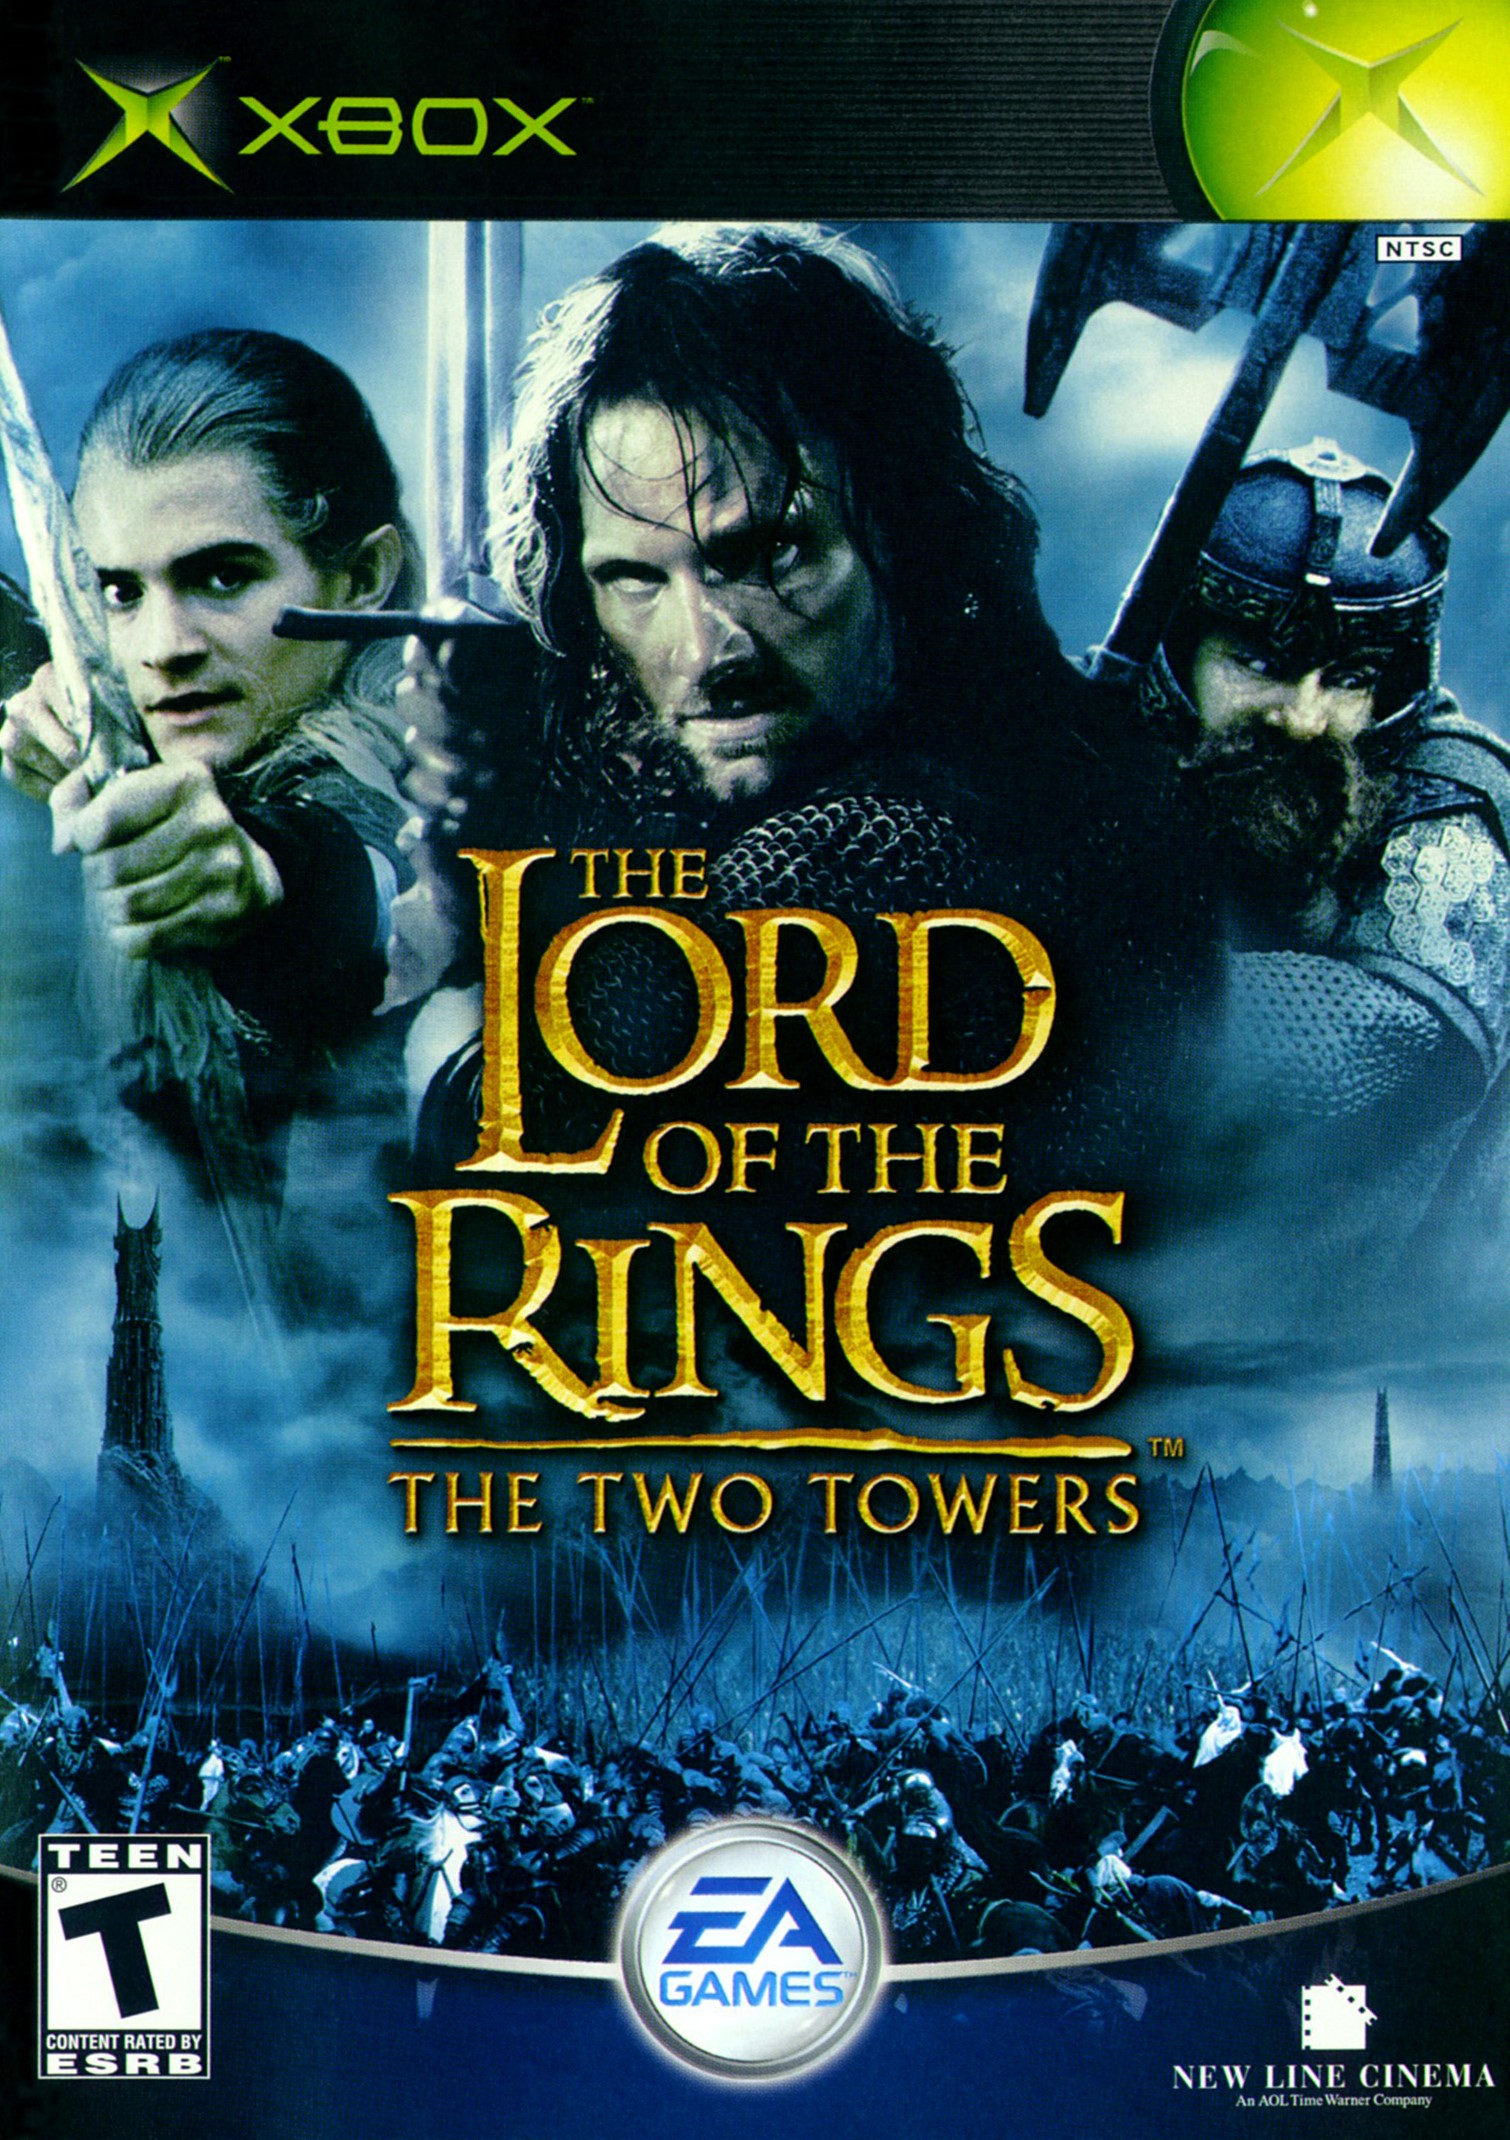 The Lord of the Rings The Two Towers (Német) - Xbox Classic Játékok